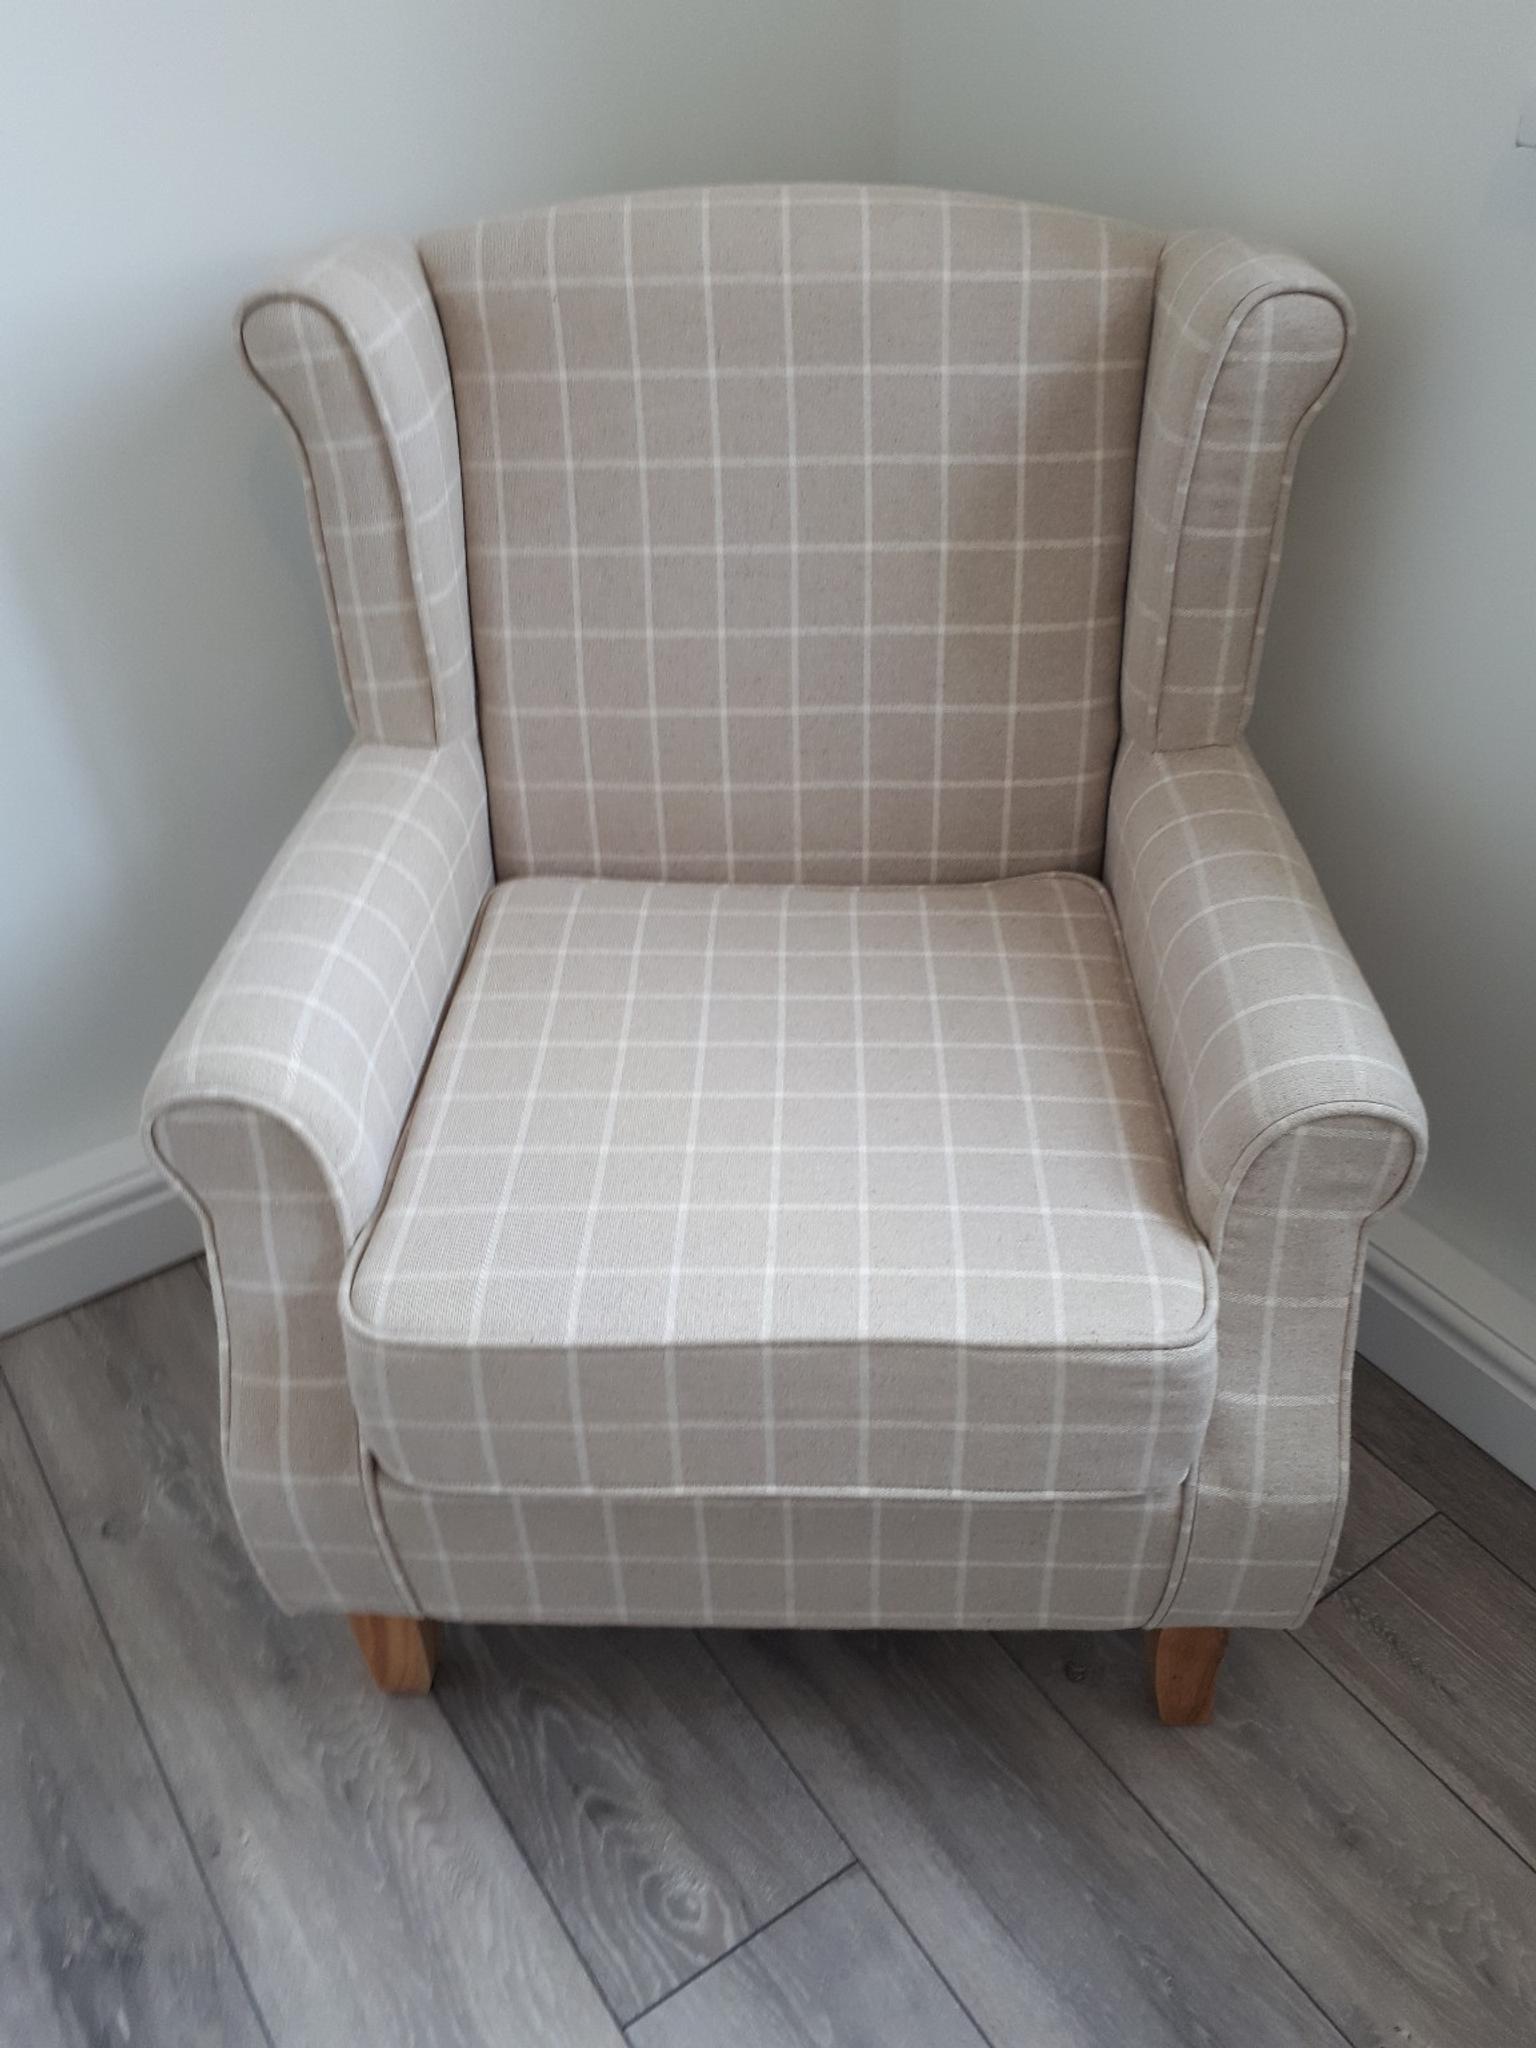 Creatice Recliner Chair Covers Dunelm for Small Space